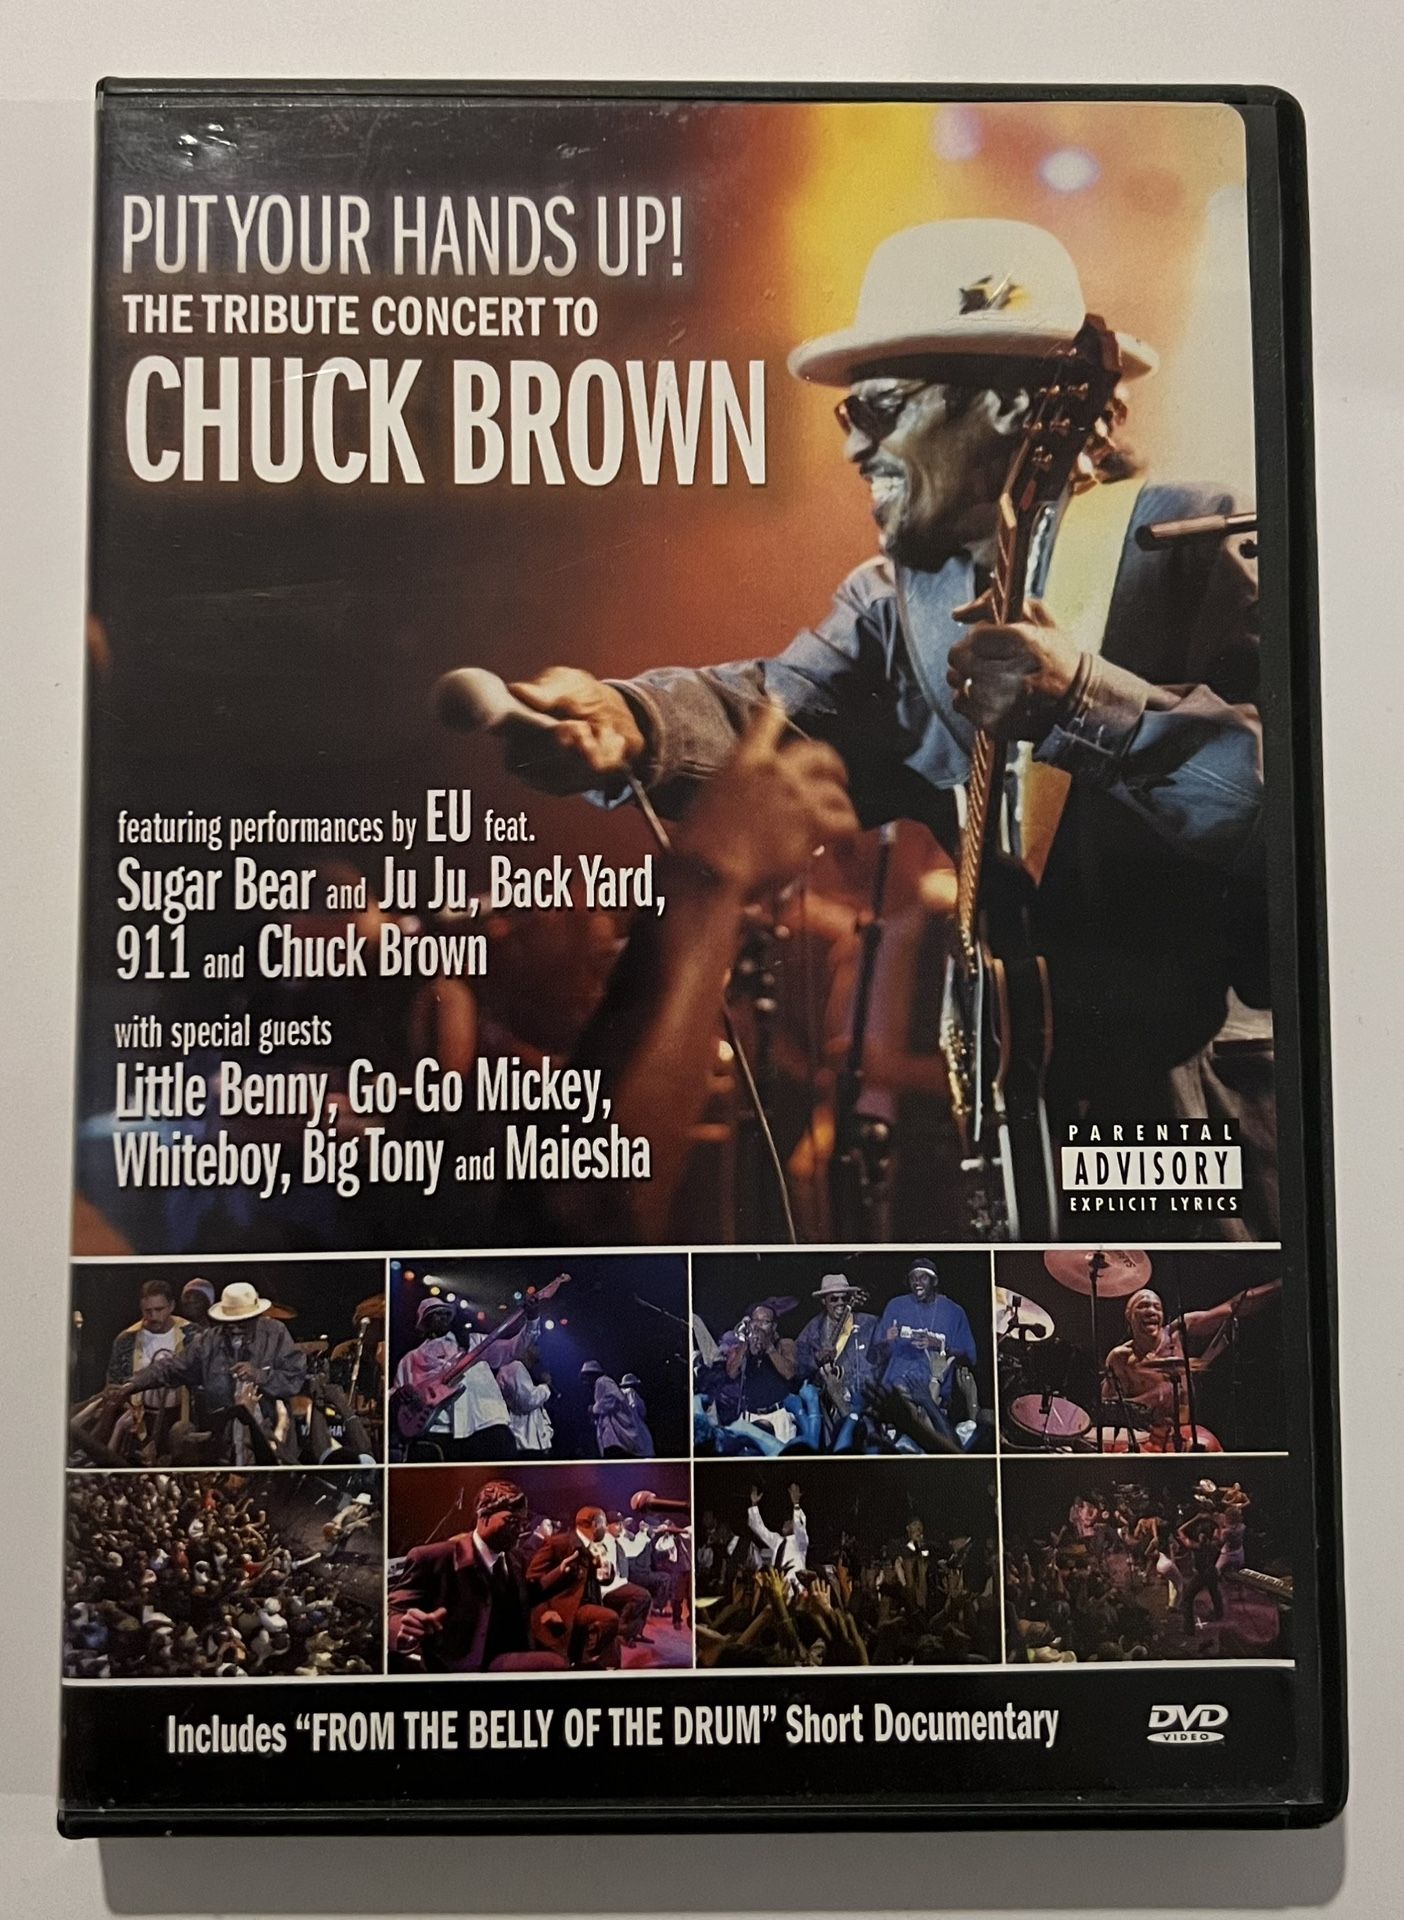 Put Your Hands Up - The Tribute Concert to Chuck Brown (DVD, 2002, 2-Disc Set)